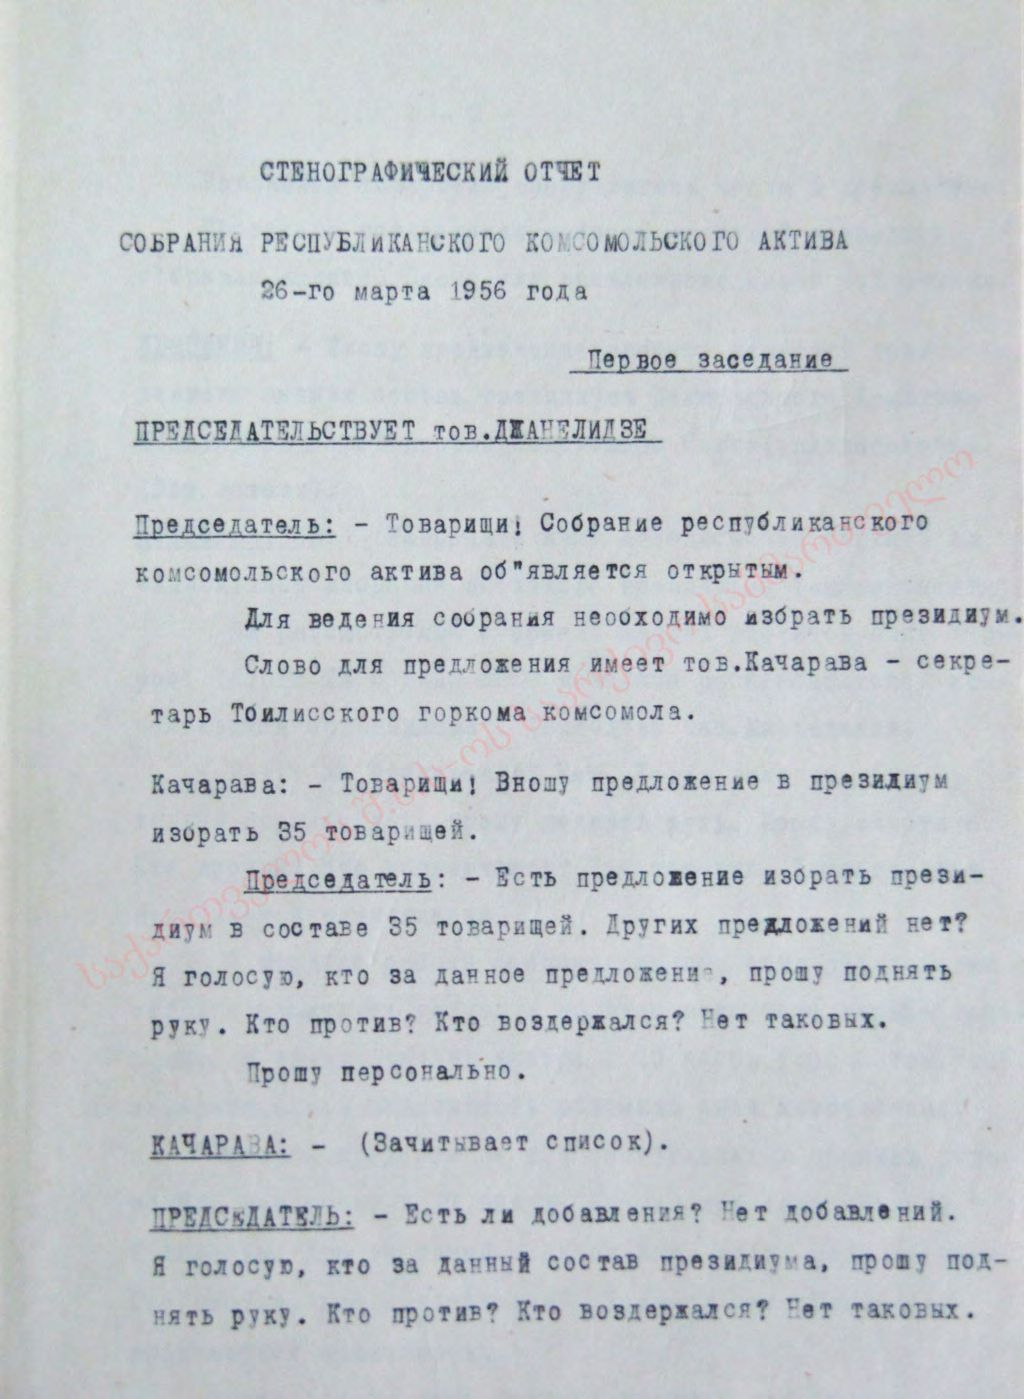 Stenographic transcript of a speech of Shevardnadze Eduard Ambrosevich -the first secretary of Kutaisi Oblast Committee of Komsomol at the meeting of republic Komsomol activists on March 28th 1956.